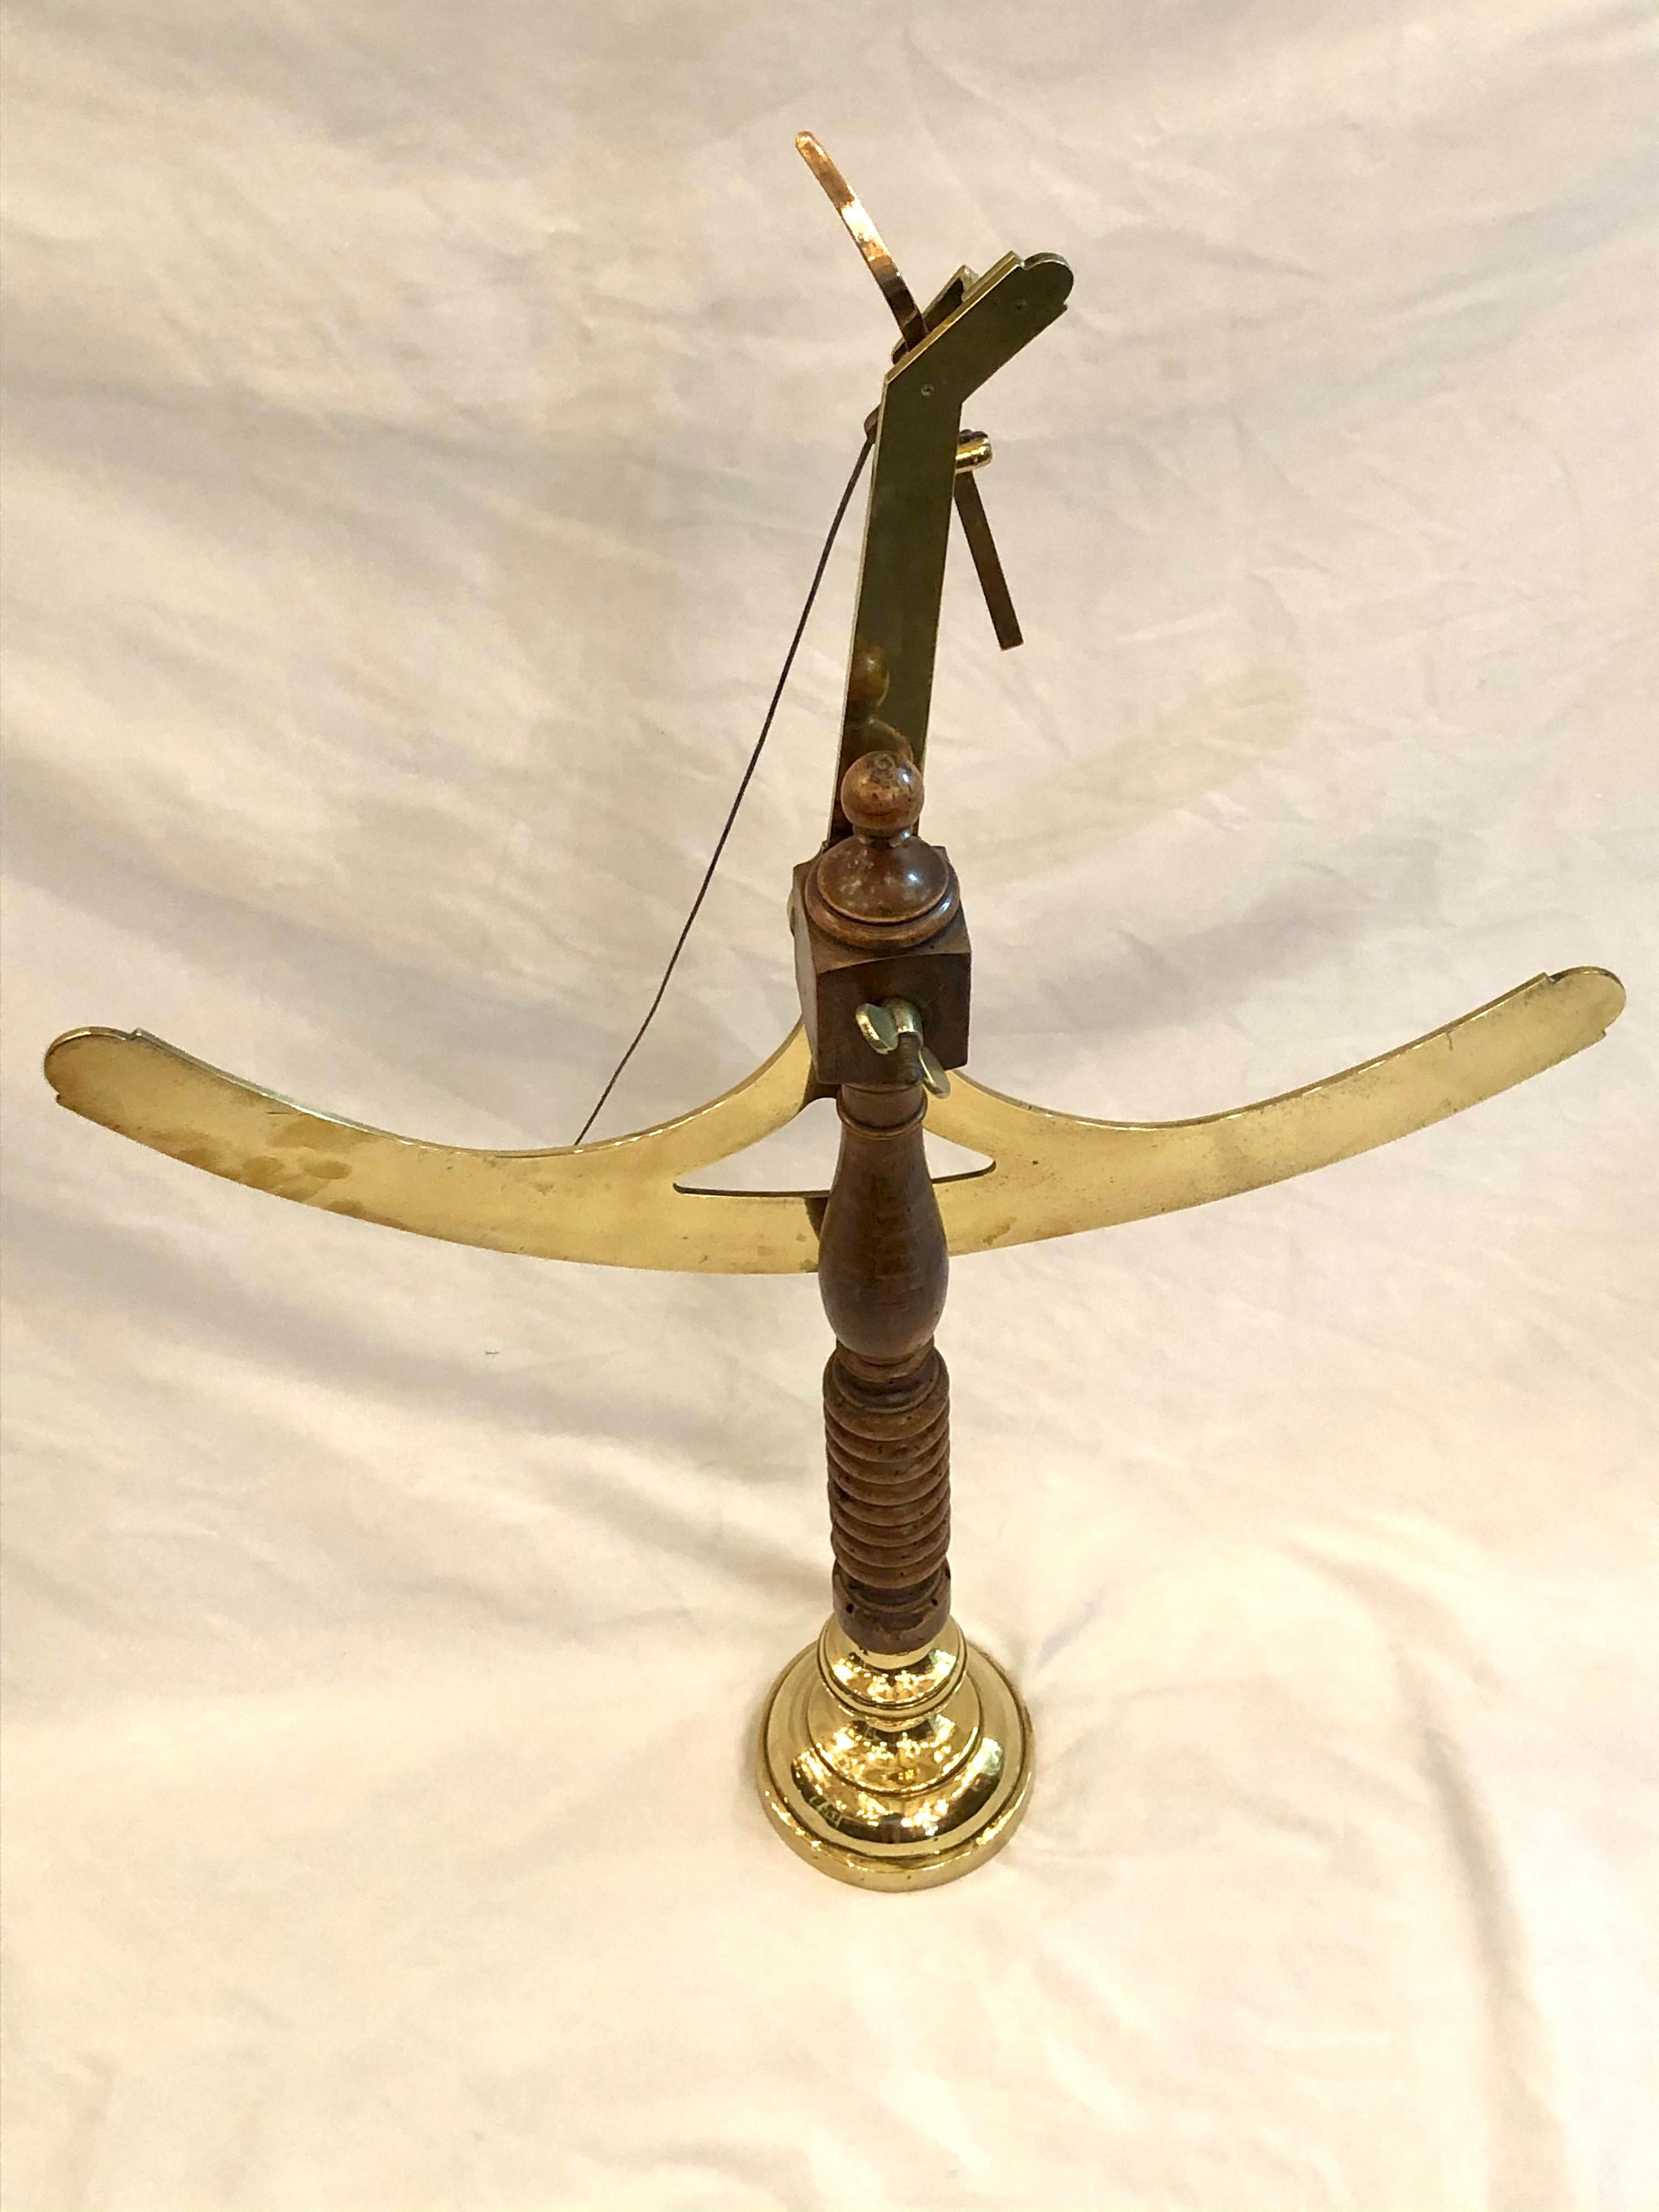 Rare antique 18th century French Lyonnaise bronze scientific Instrument used for weighing Silk, in anchor form, 1789-1795.  Made by 